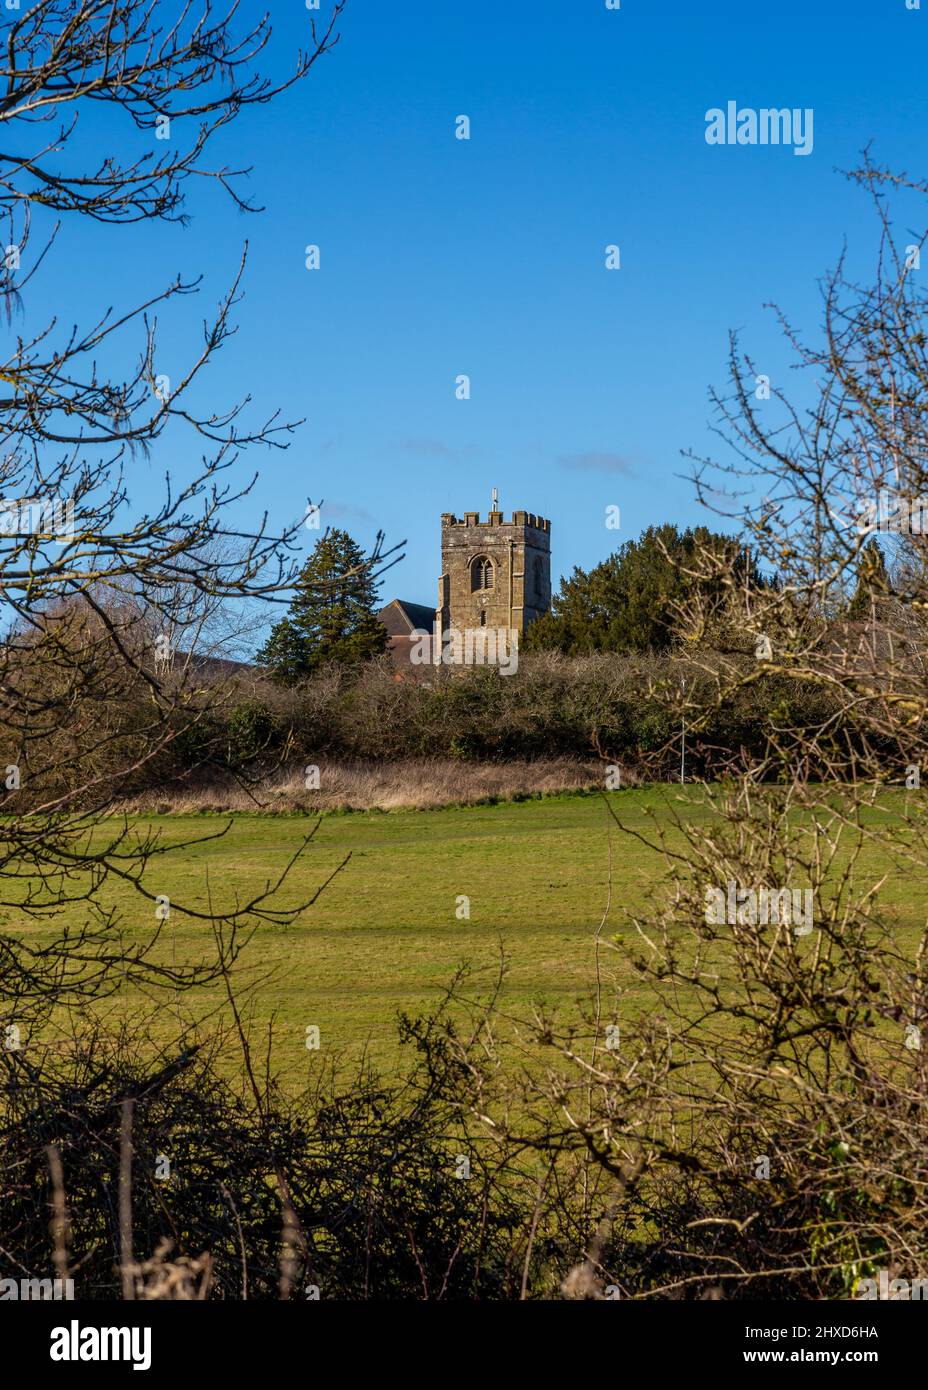 Distance view of St.Peter's Church in Redditch, Worcestershire, England. Stock Photo